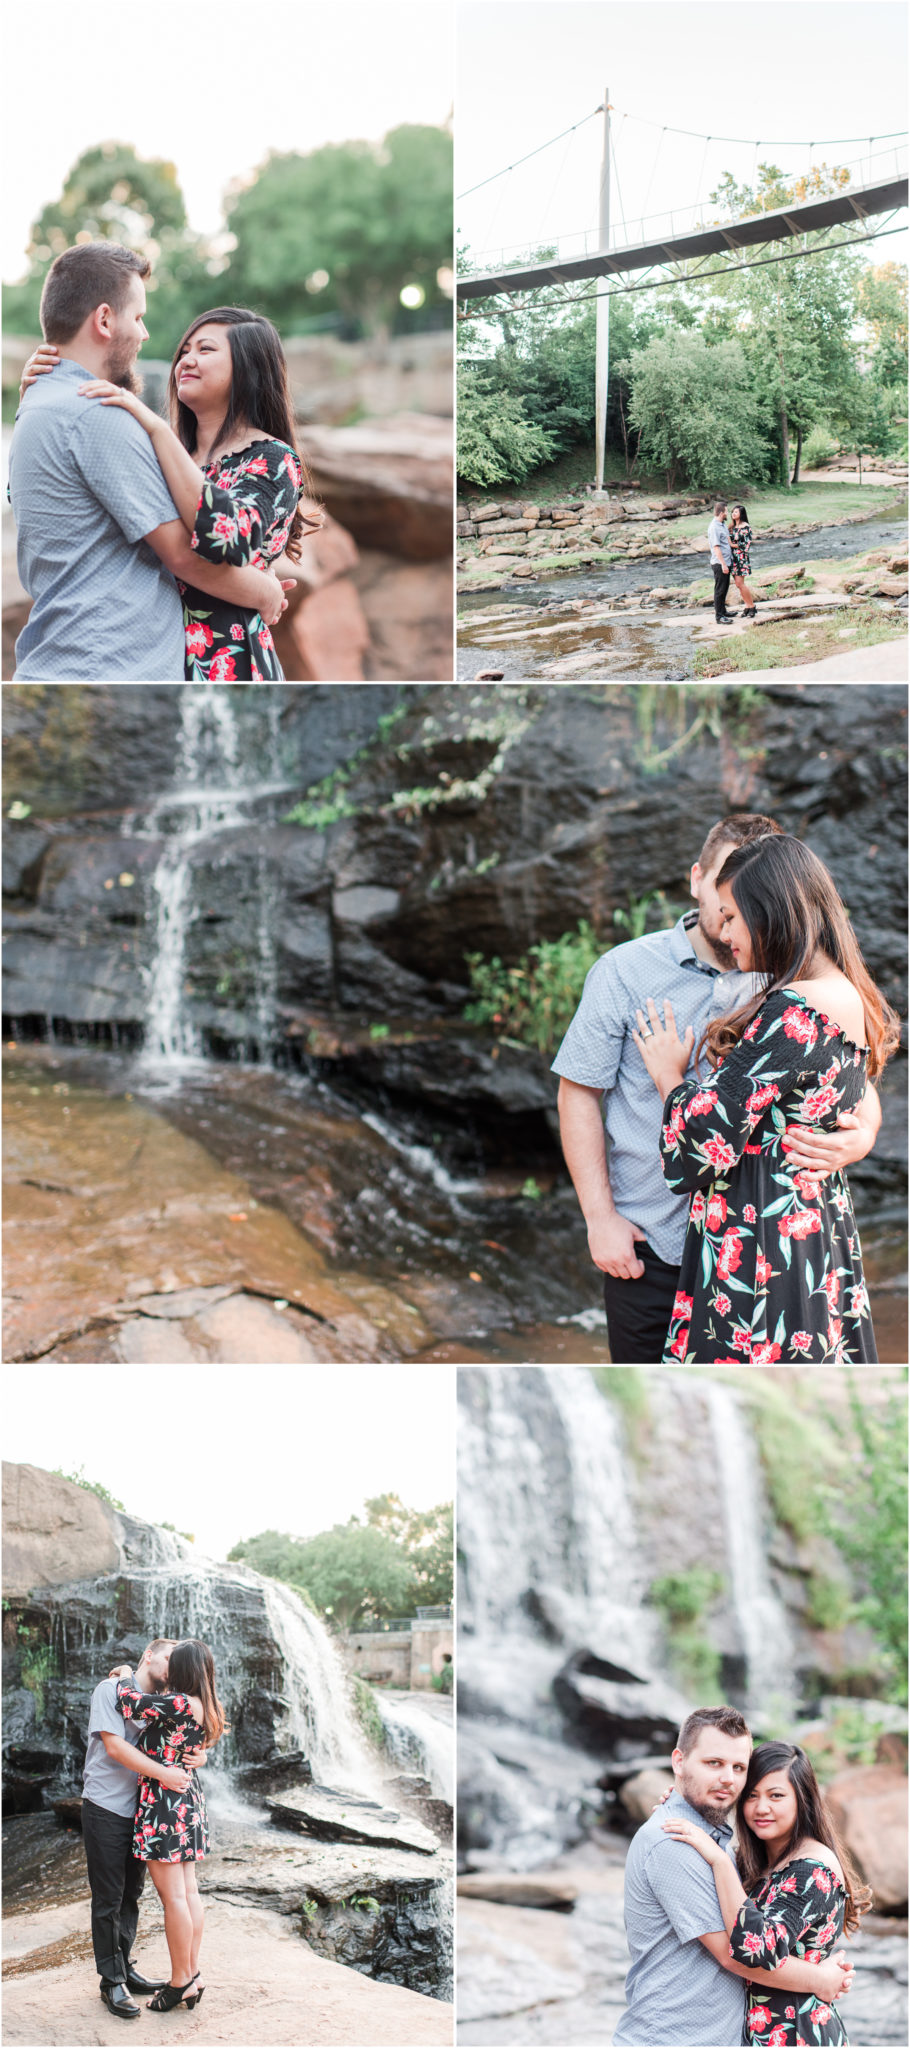 Summer sunrise engagement in downtown Greenville SC